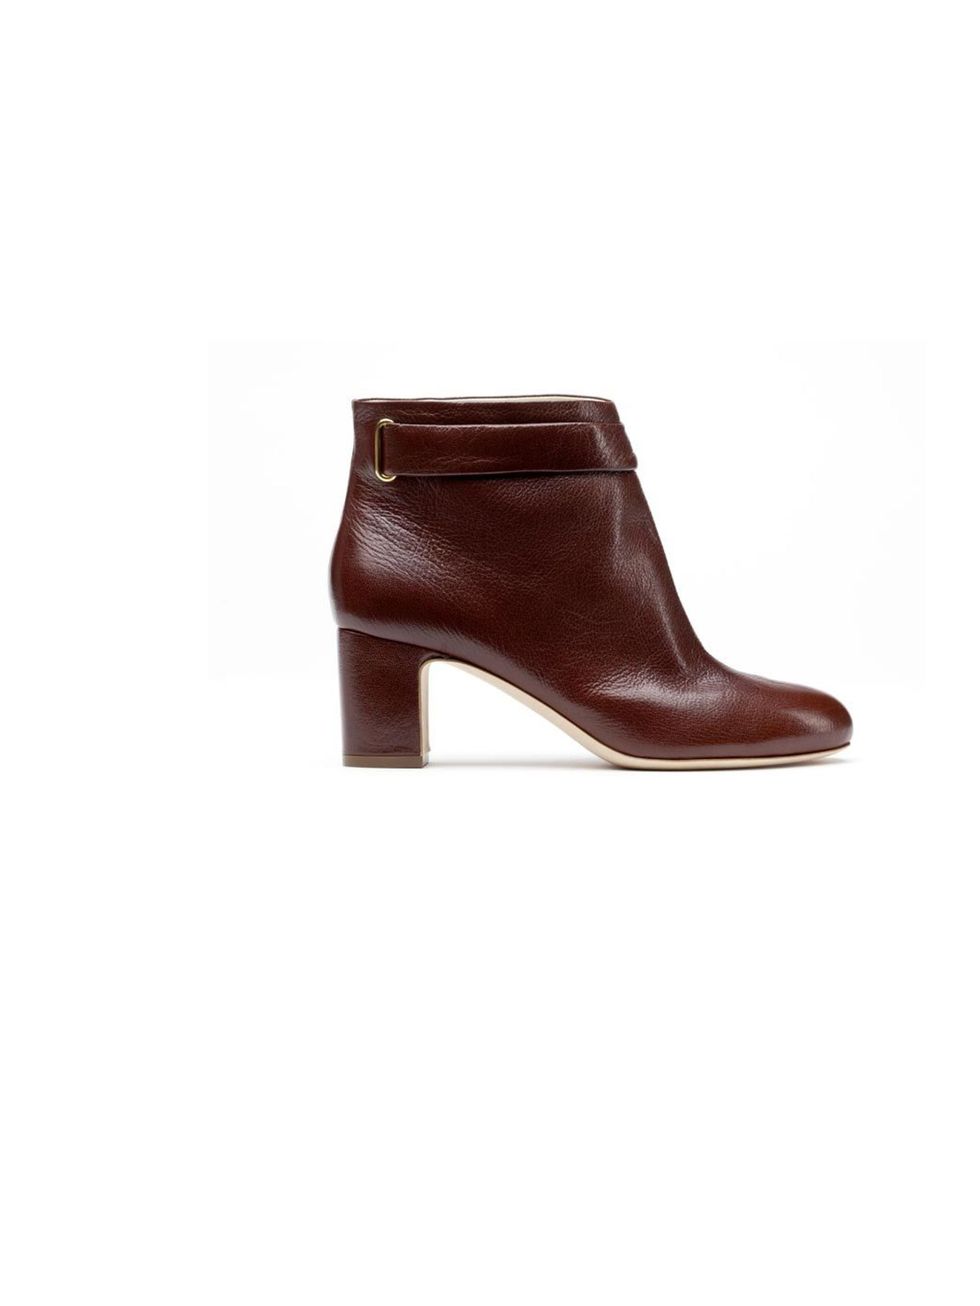 <p>Rupert Sanderson 'Sargon' ankle boot in red, £625, For stockists call 0207 491 2220</p>